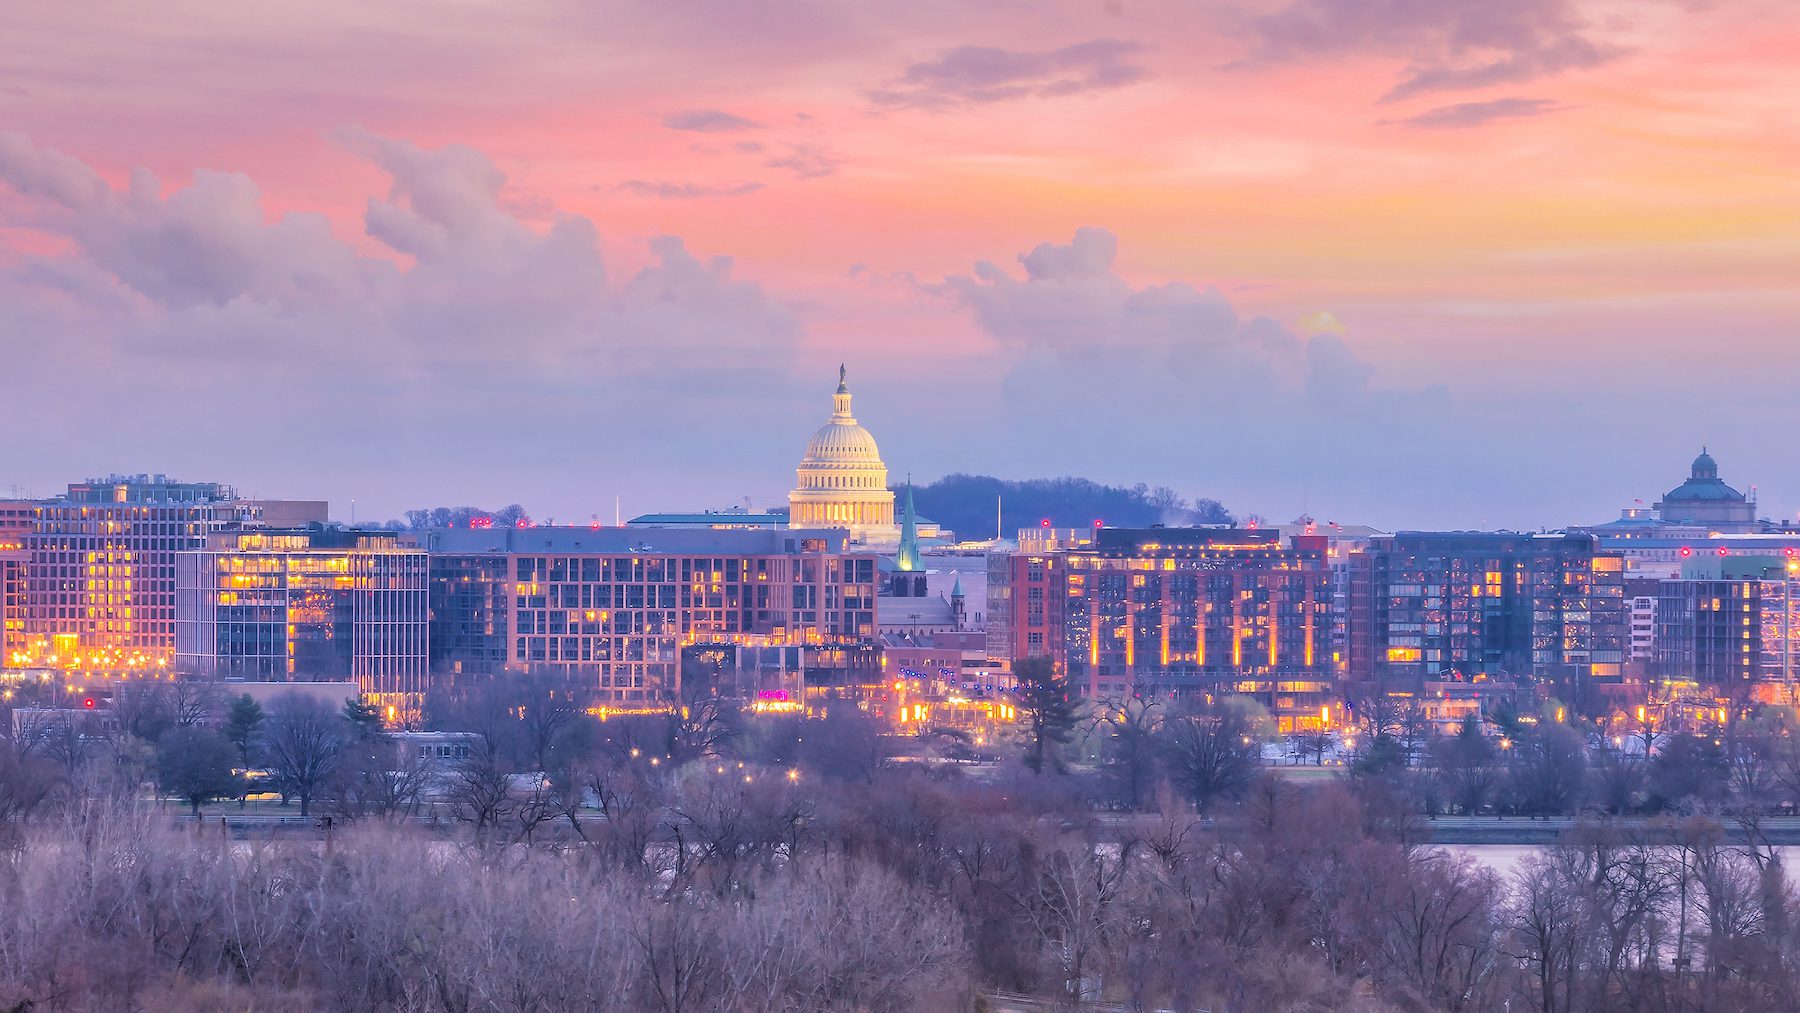 How to Spend 24 Hours in Washington D.C.